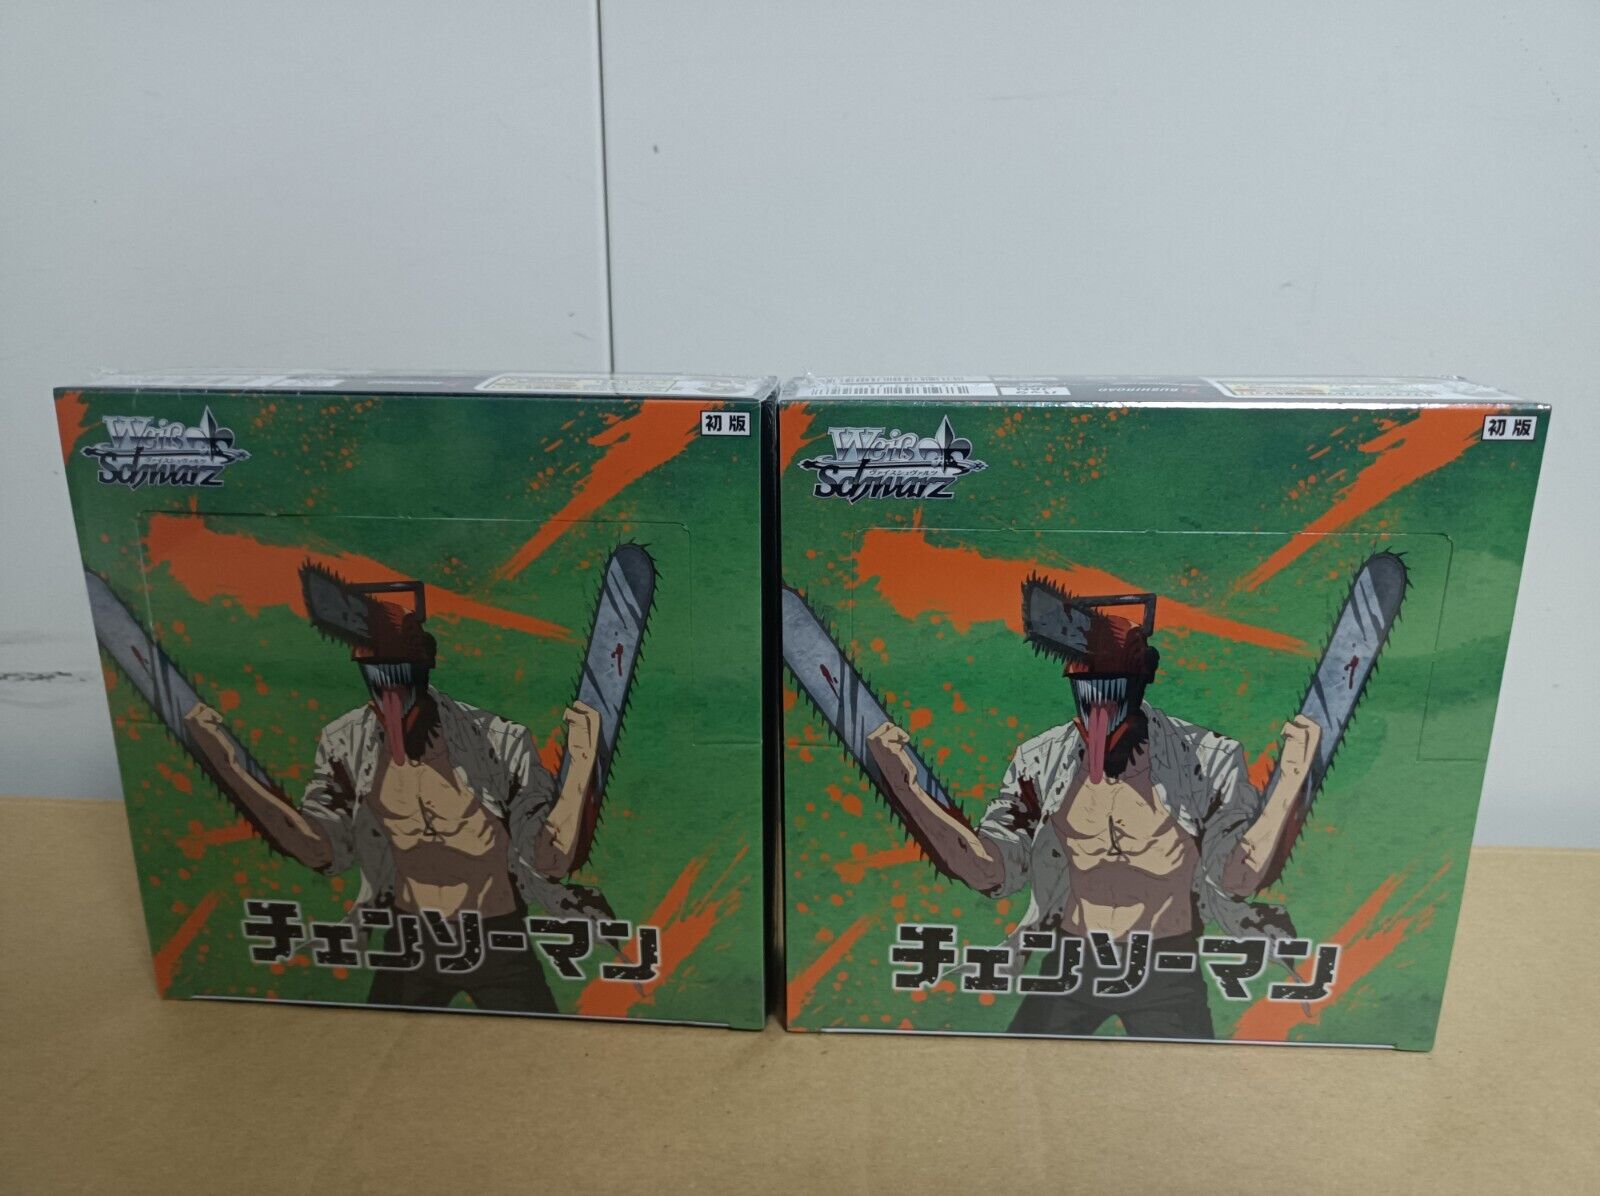 Weiss Schwarz chainsaw man Booster Pack TCG Box Bushiroad × 2 box (with shrink)